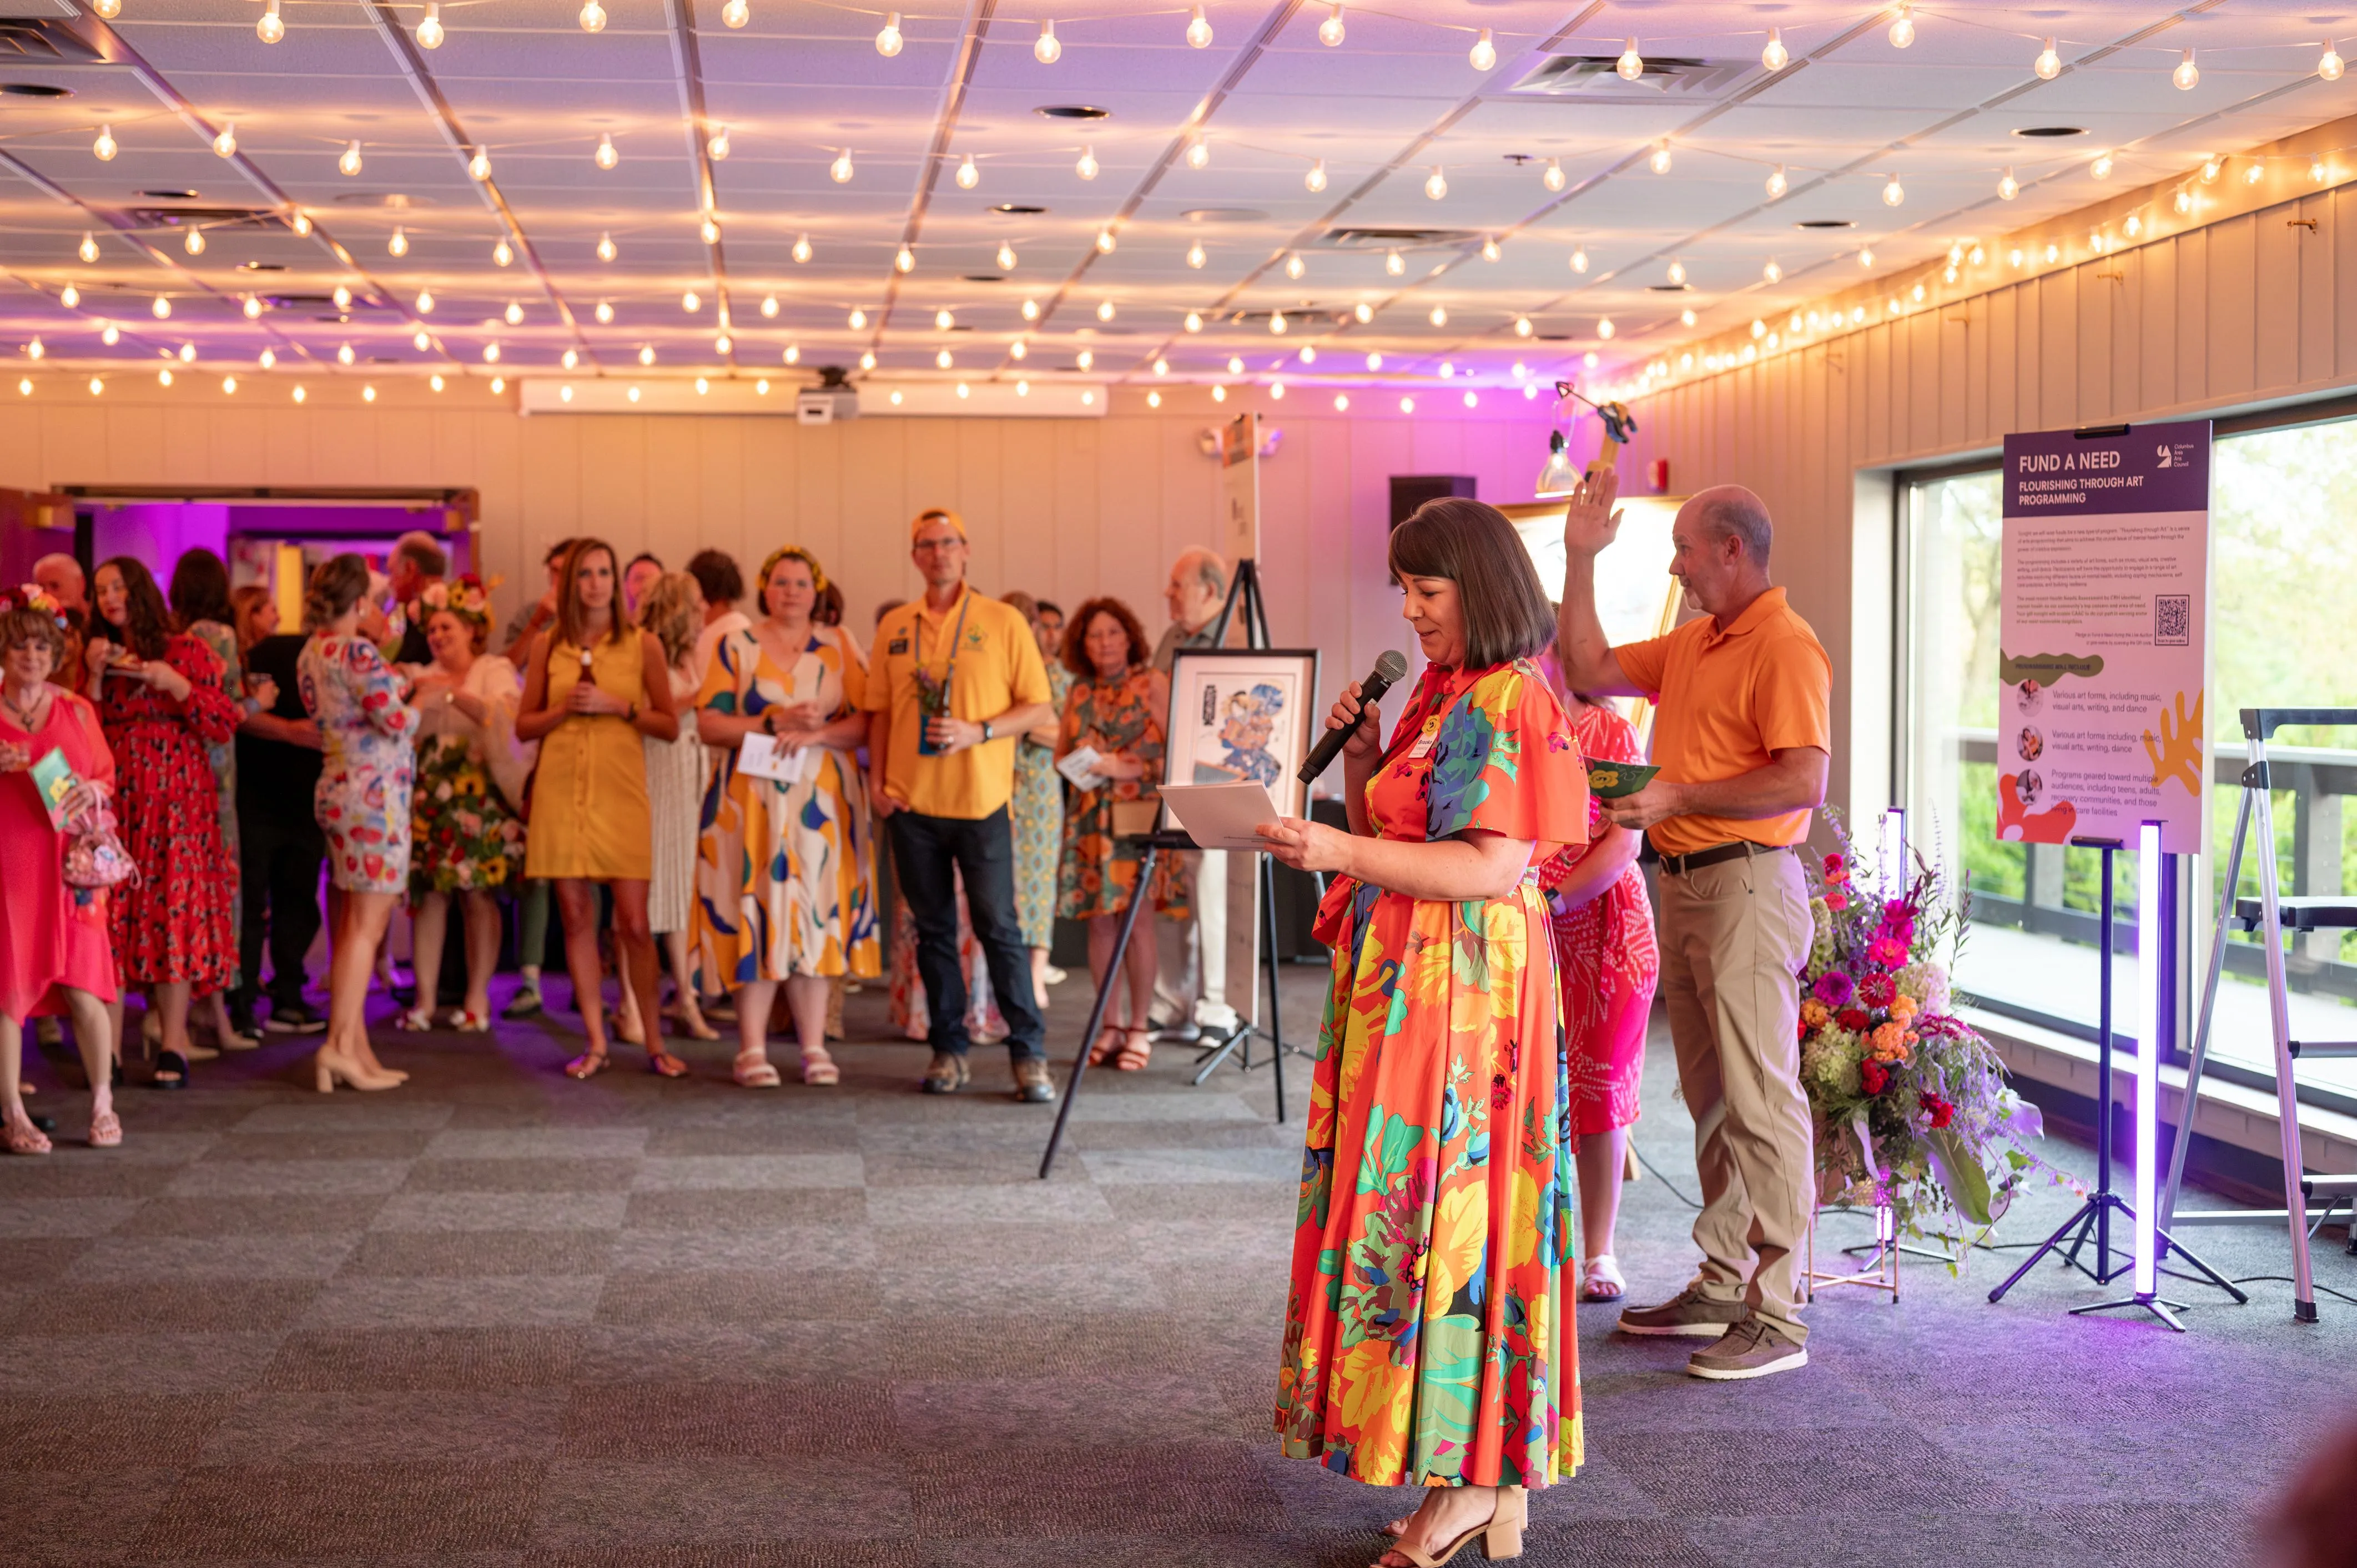 A group of people gathered at an indoor event with a woman in a colorful dress holding a framed picture in the foreground.